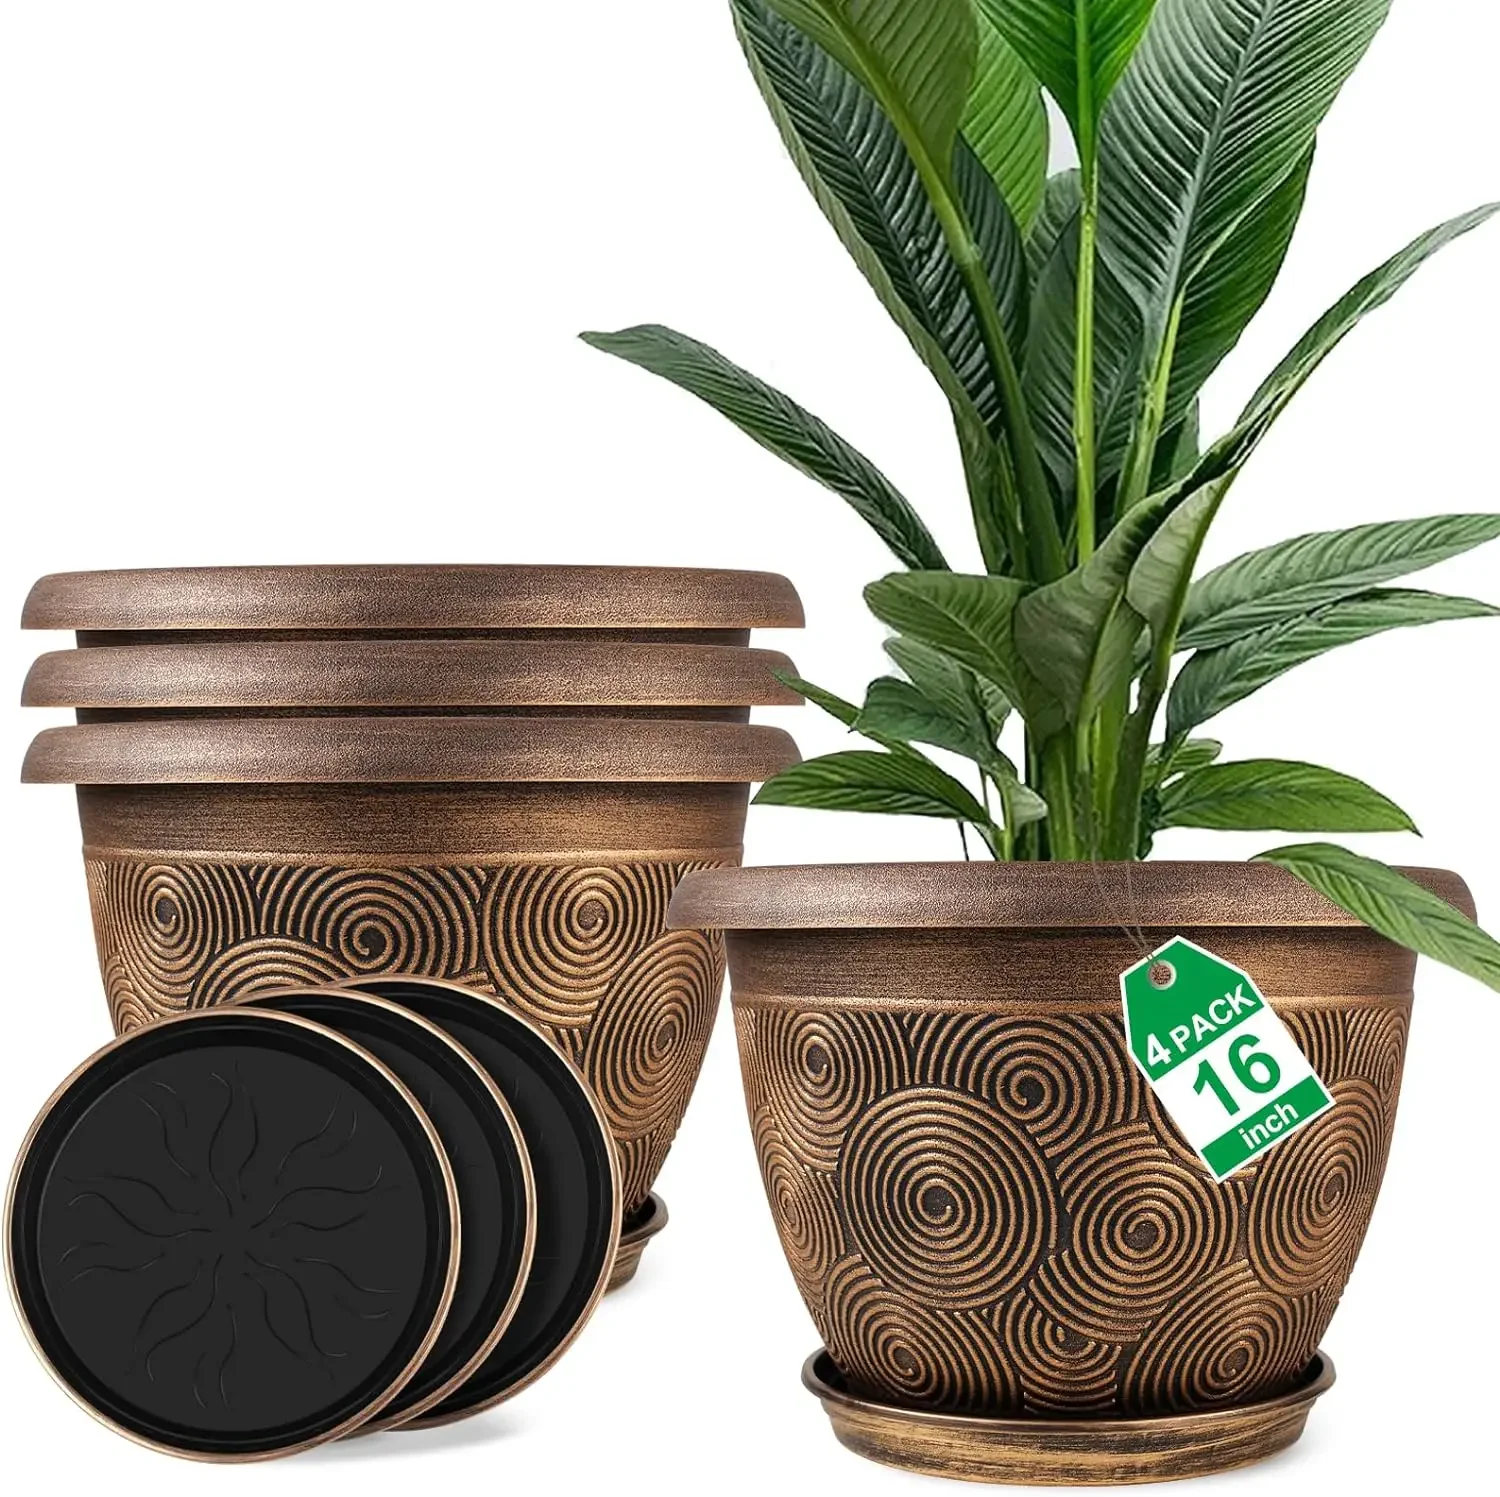 

16 Inch Large Planter Pot for Plants Indoor Outdoor, 4 Pack Plastic Flower Pots w/ Drainage Hole & Tray,Modern Decorative Garden